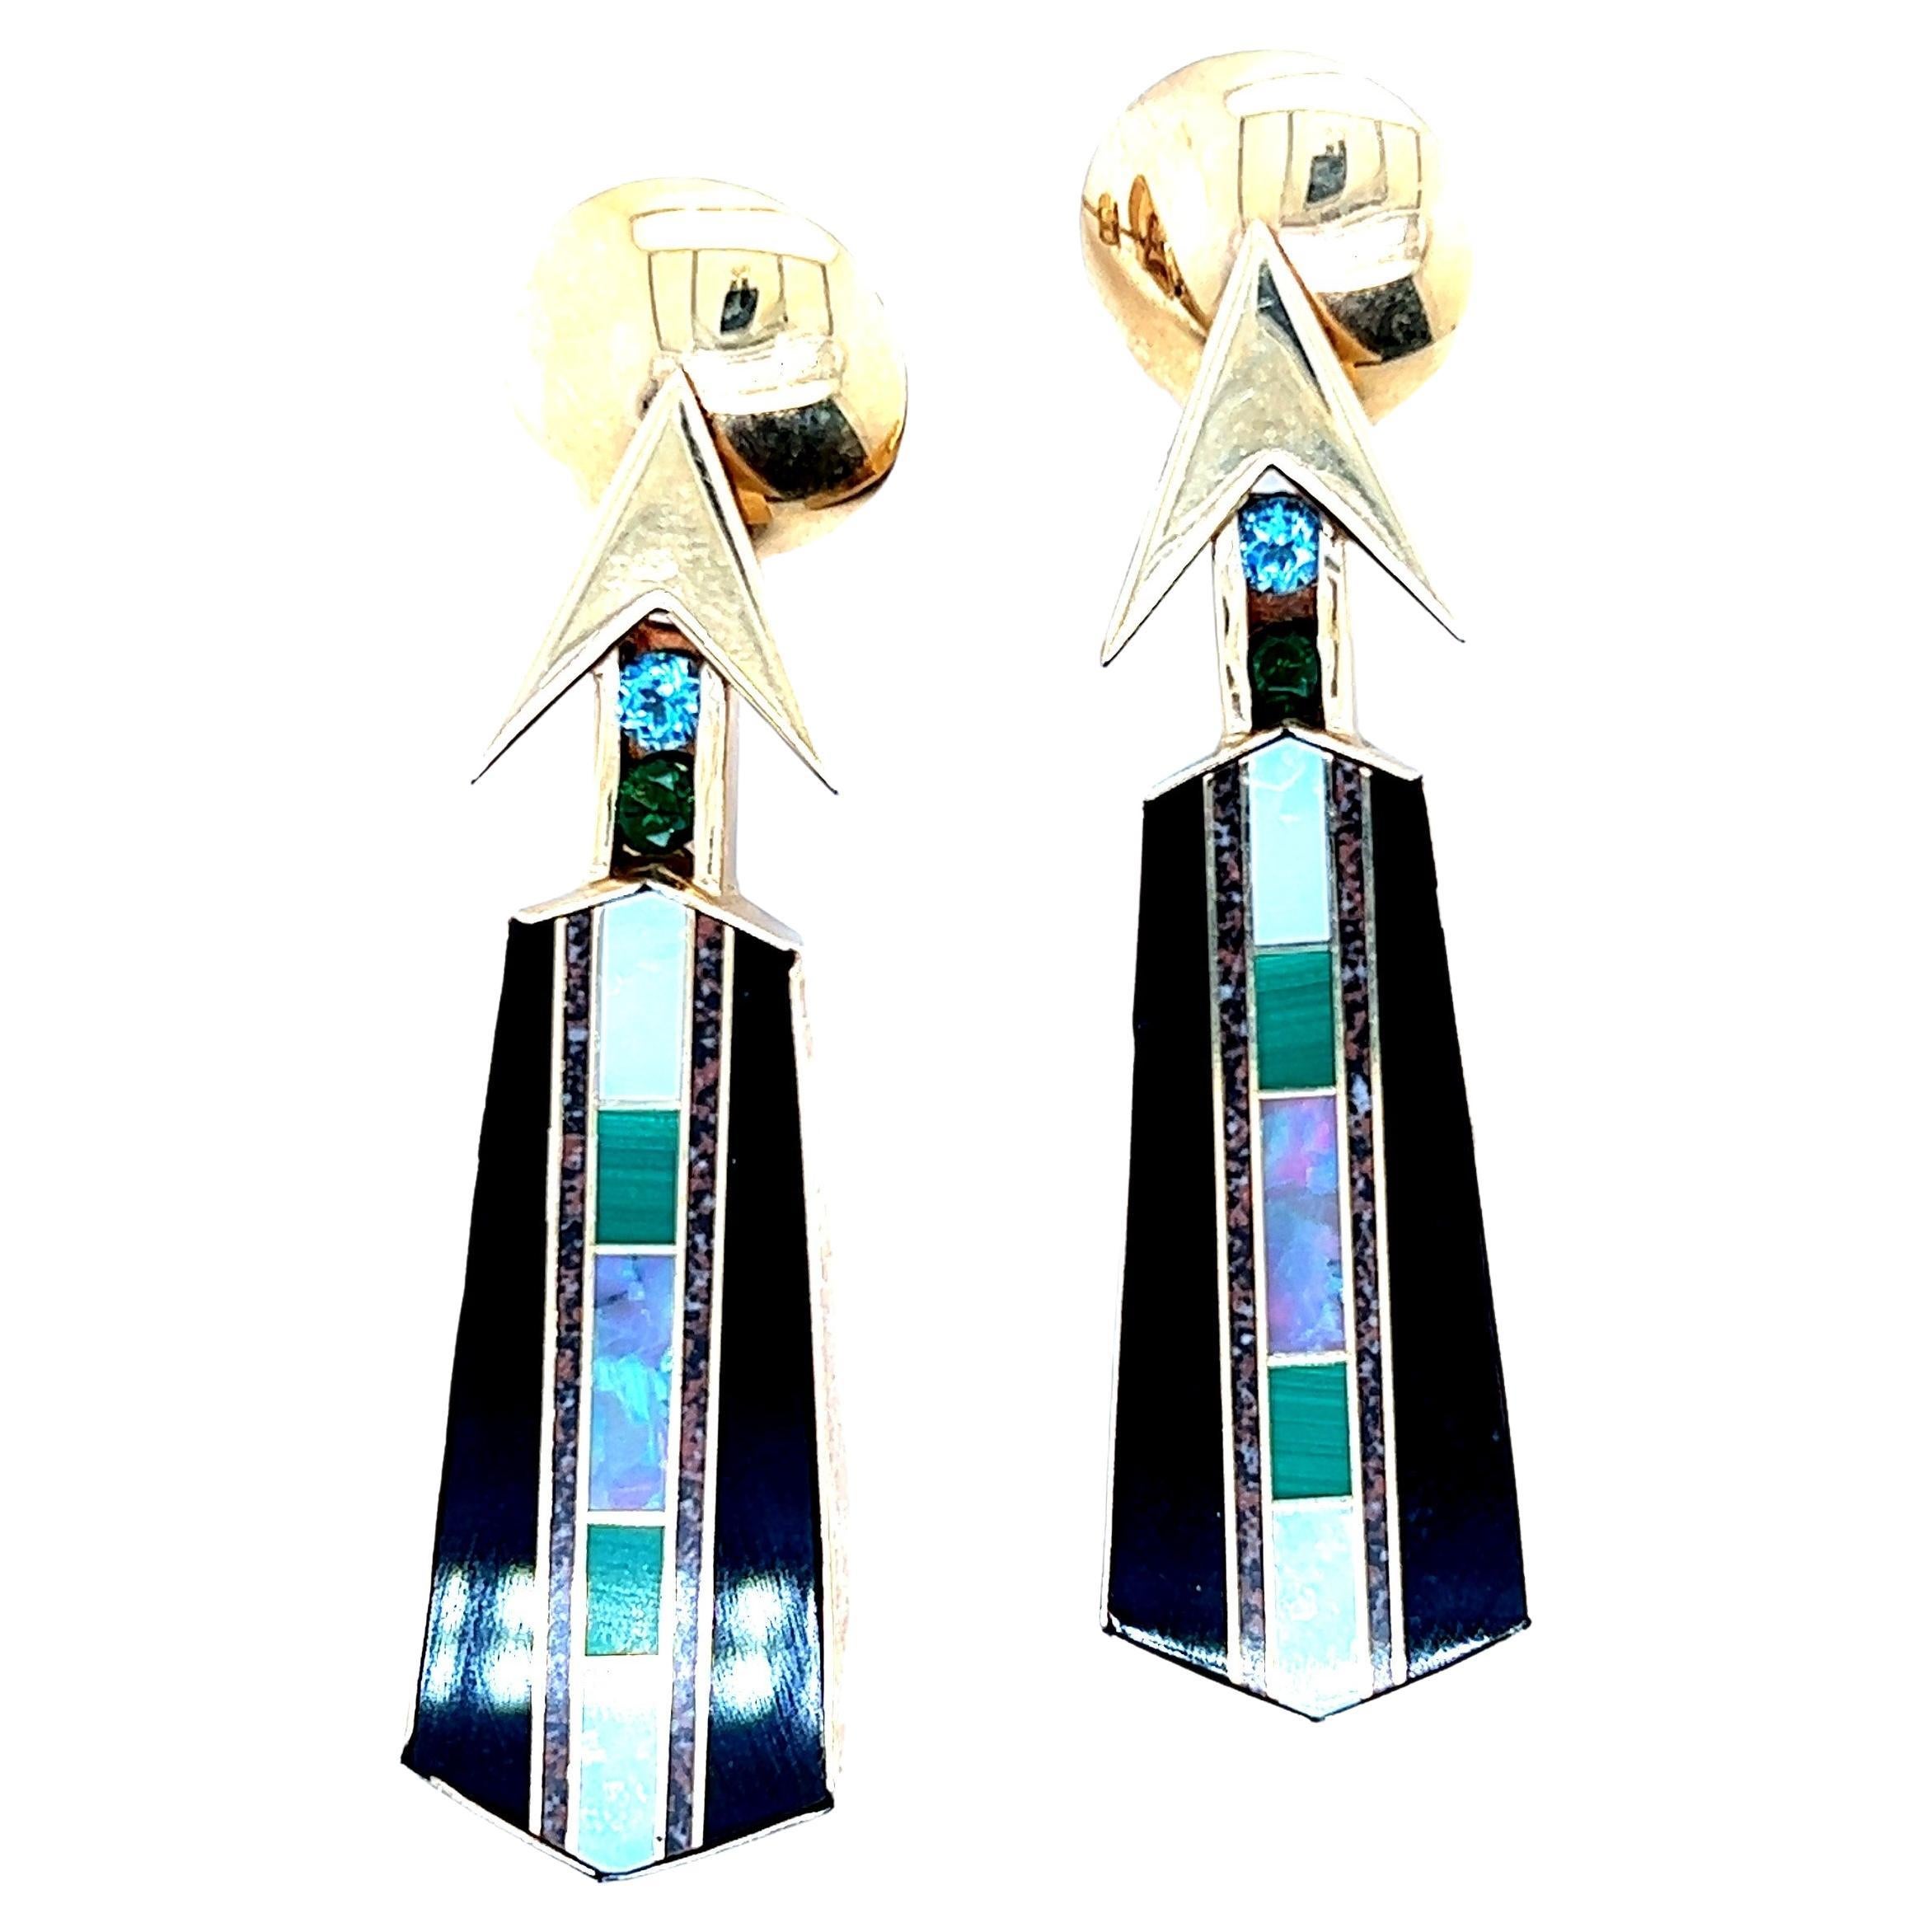 These cool Statement Earrings were custom make by Jeweler's Workshop in Madison, Wisconsin. The earrings contain inliad sections of black onyx, mother of pearl, black opal and white opal. The earrings also contain channel set blue topaz and chrome